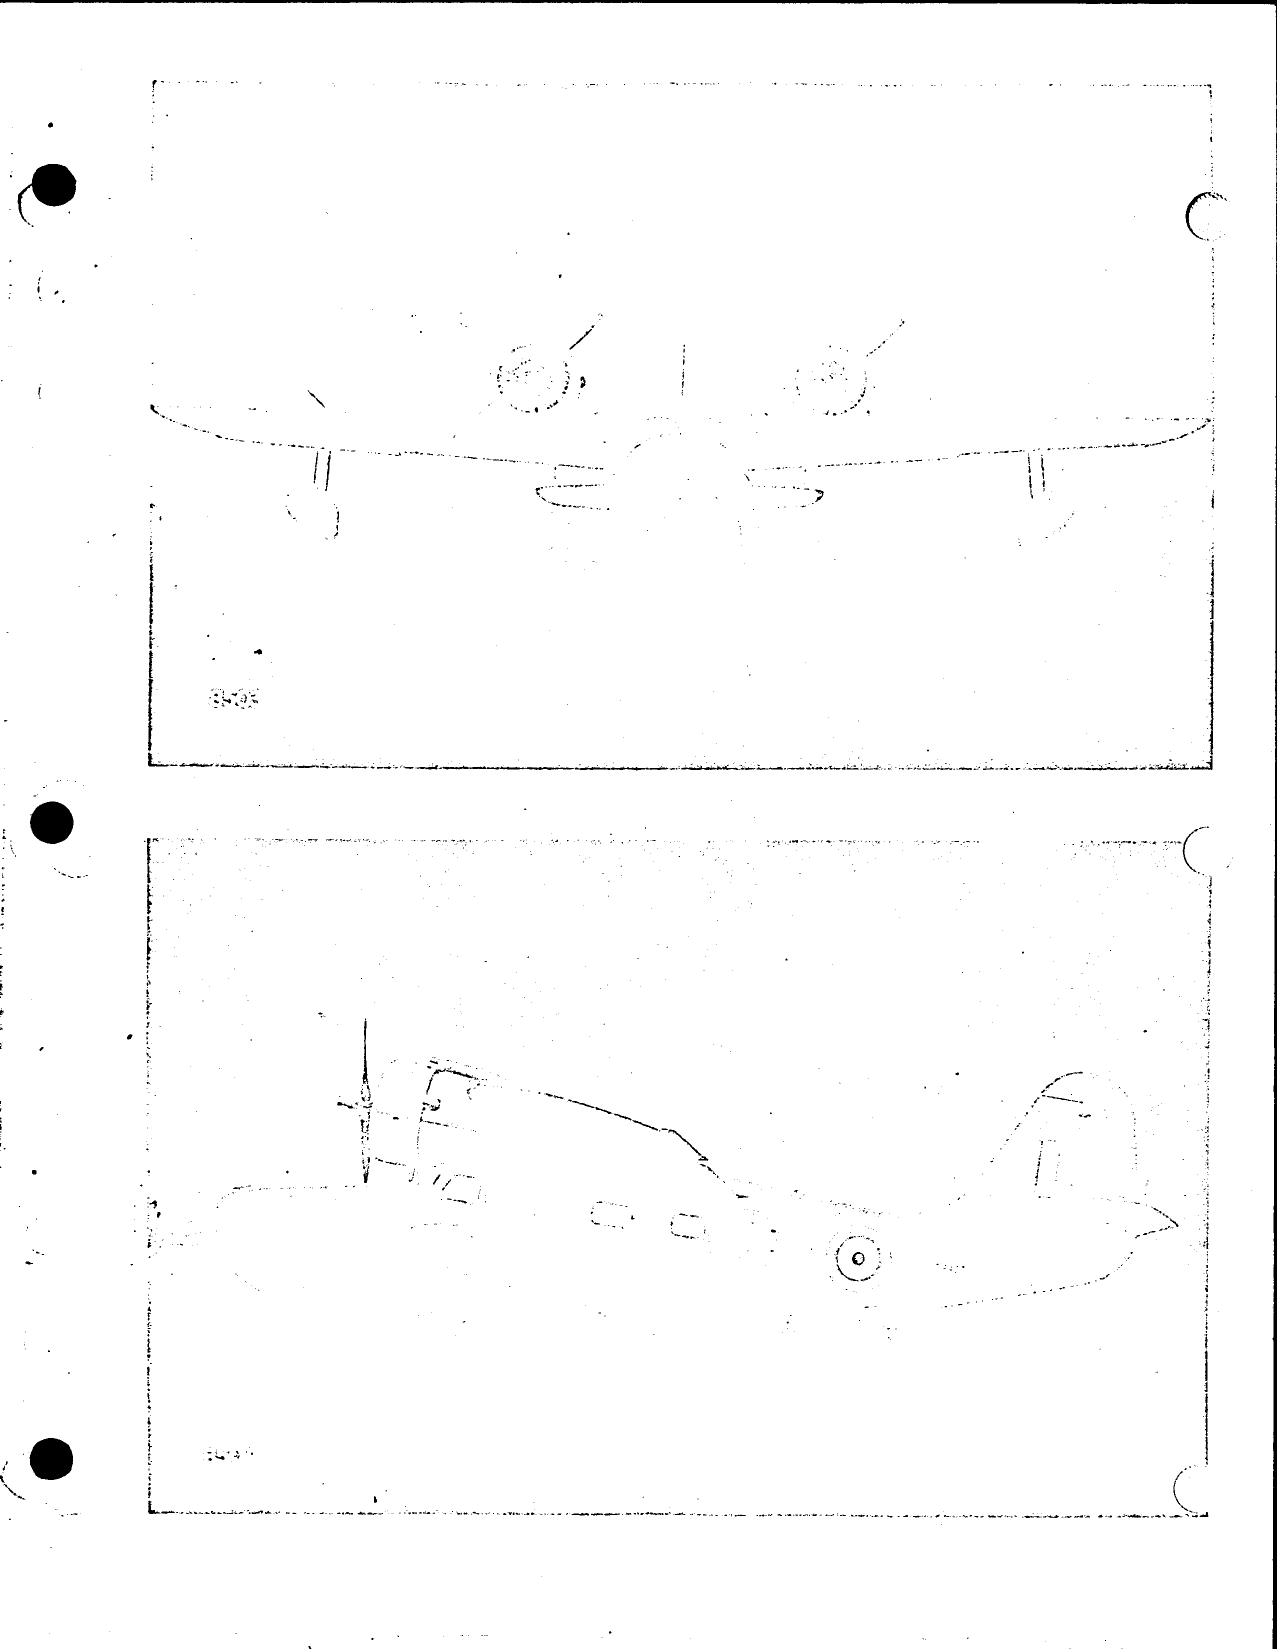 Sample page  3 from AirCorps Library document: Structural Repair - Grumman Goose - JRF-1, JRF-2, JRF-3, JRF-4, JRF-5, JRF-6B